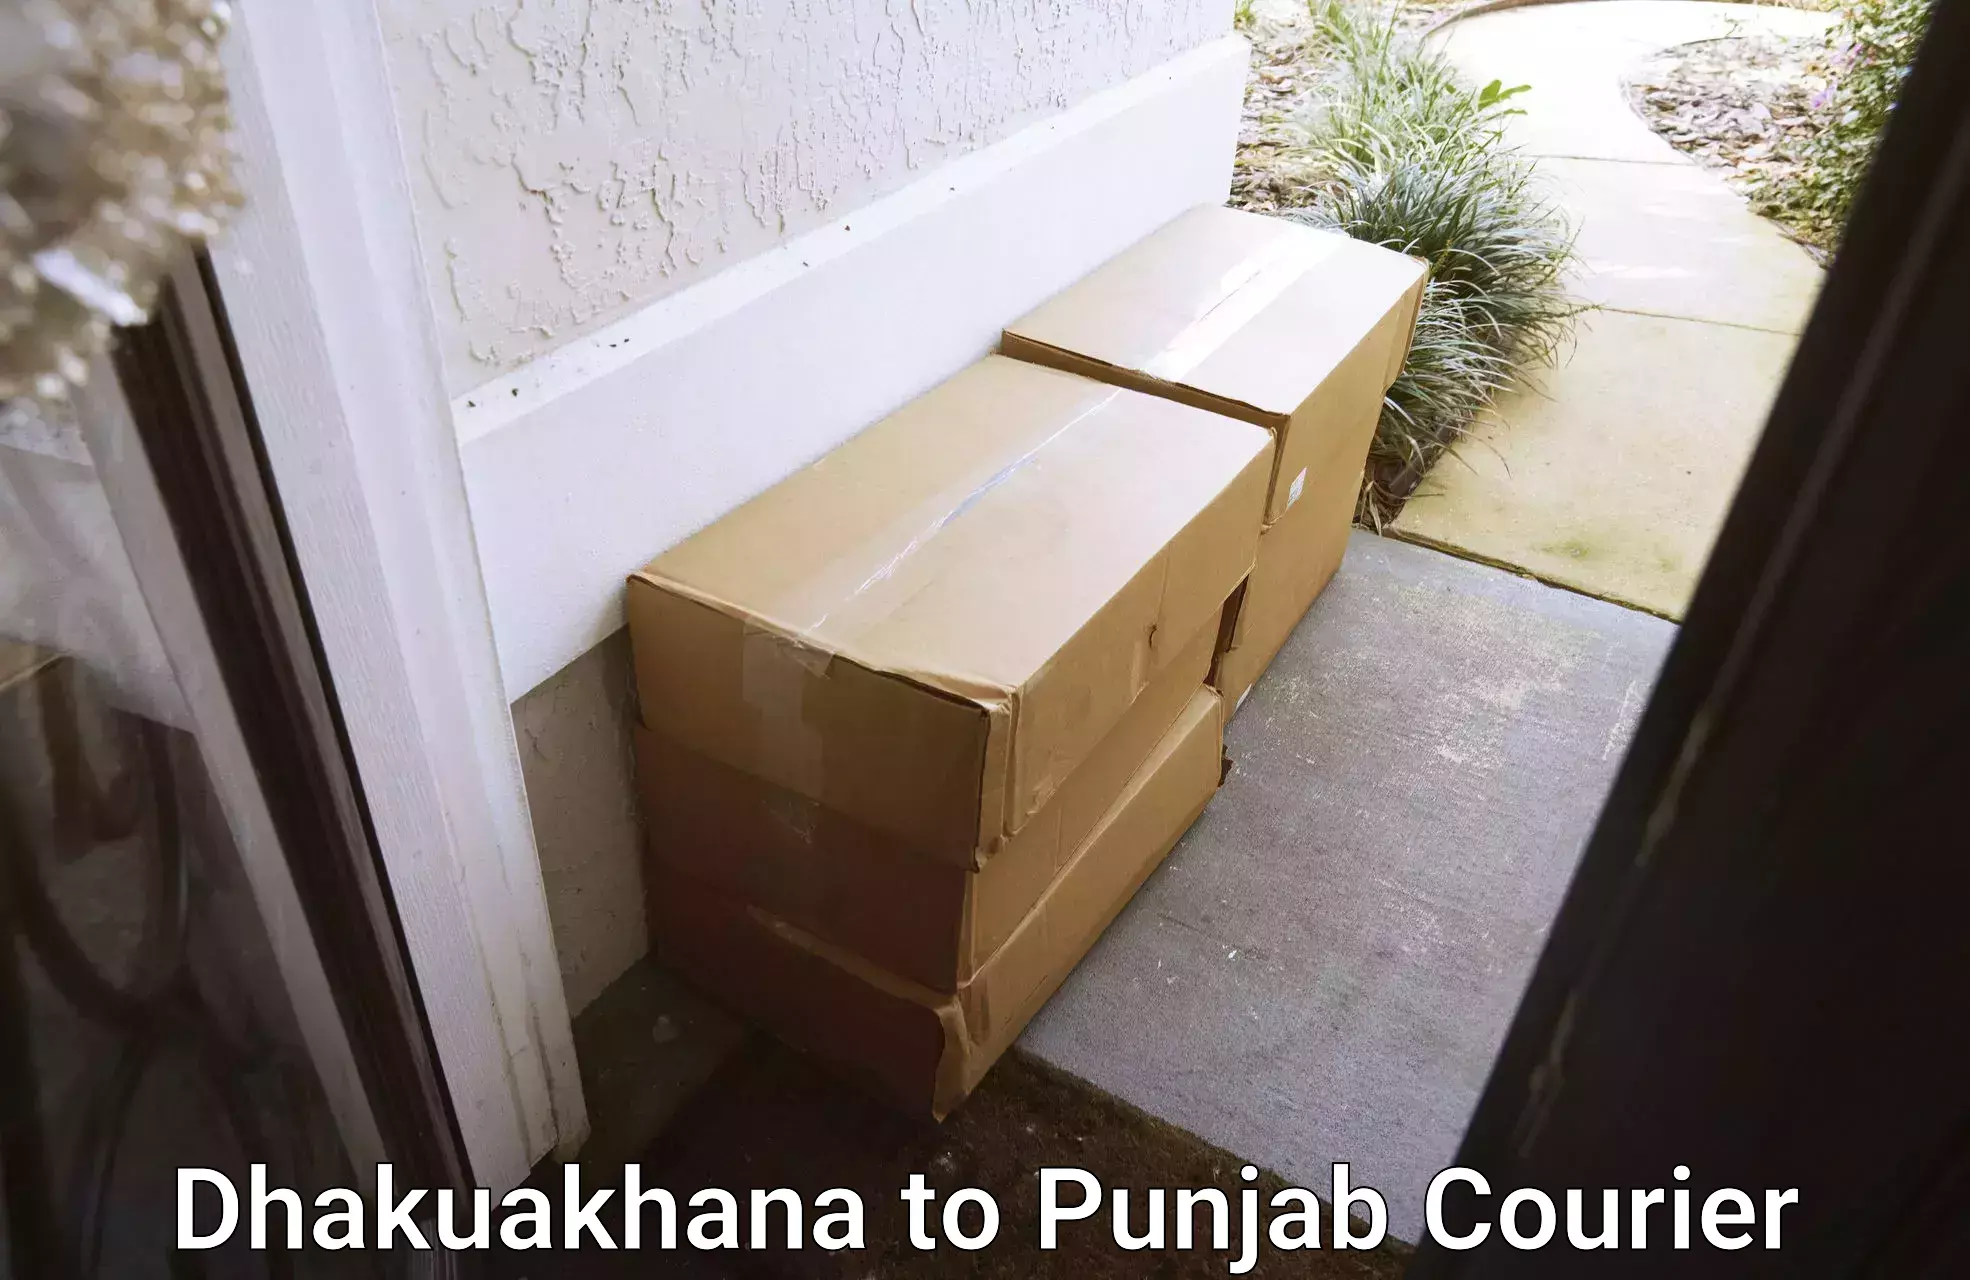 Air courier services Dhakuakhana to Central University of Punjab Bathinda